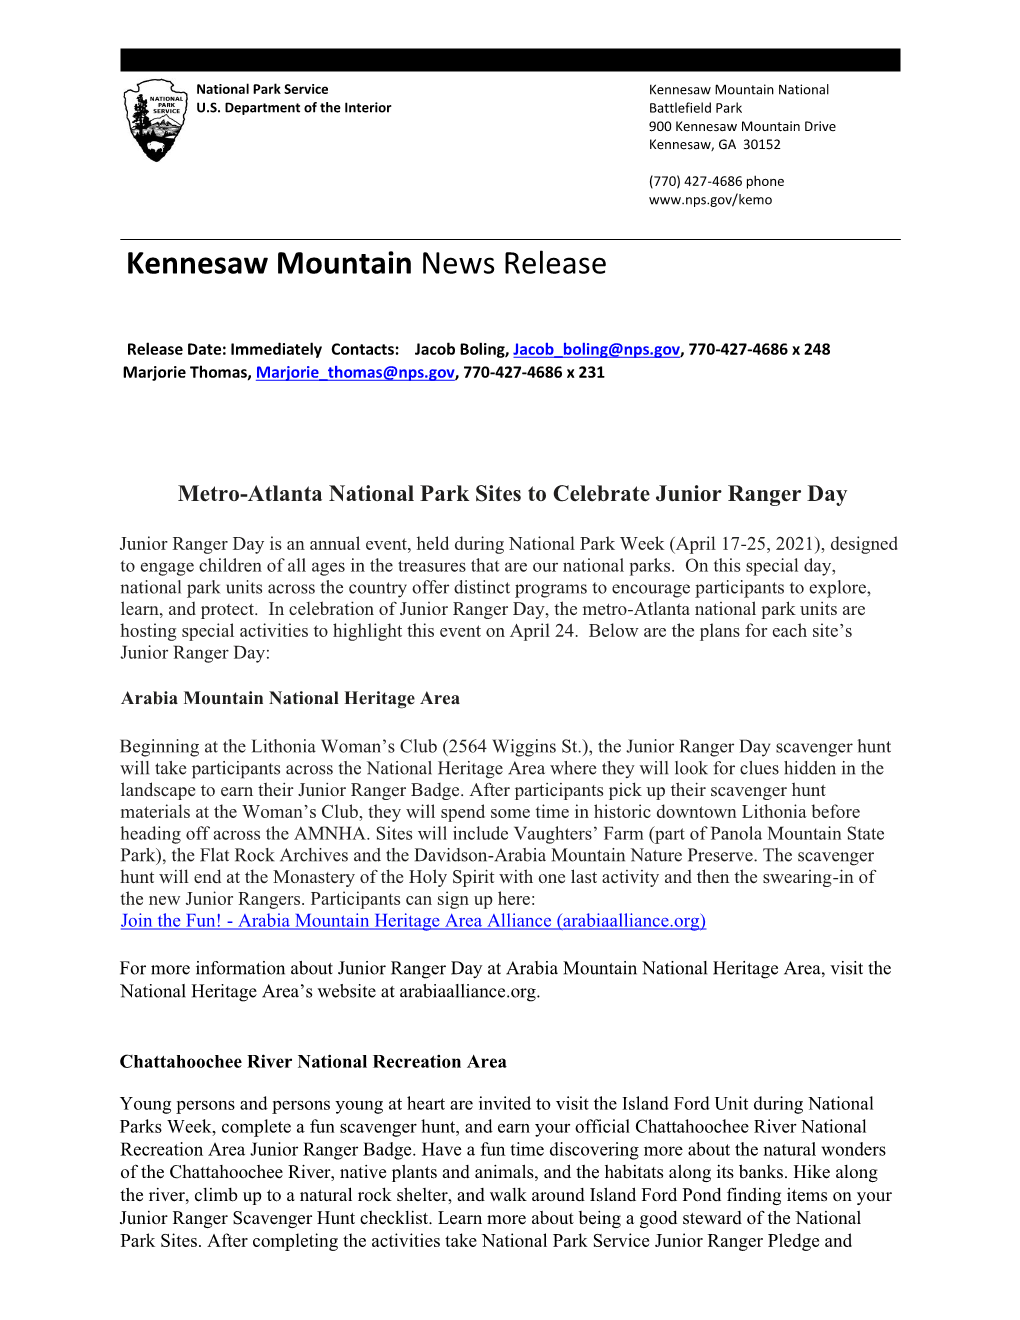 Kennesaw Mountain News Release